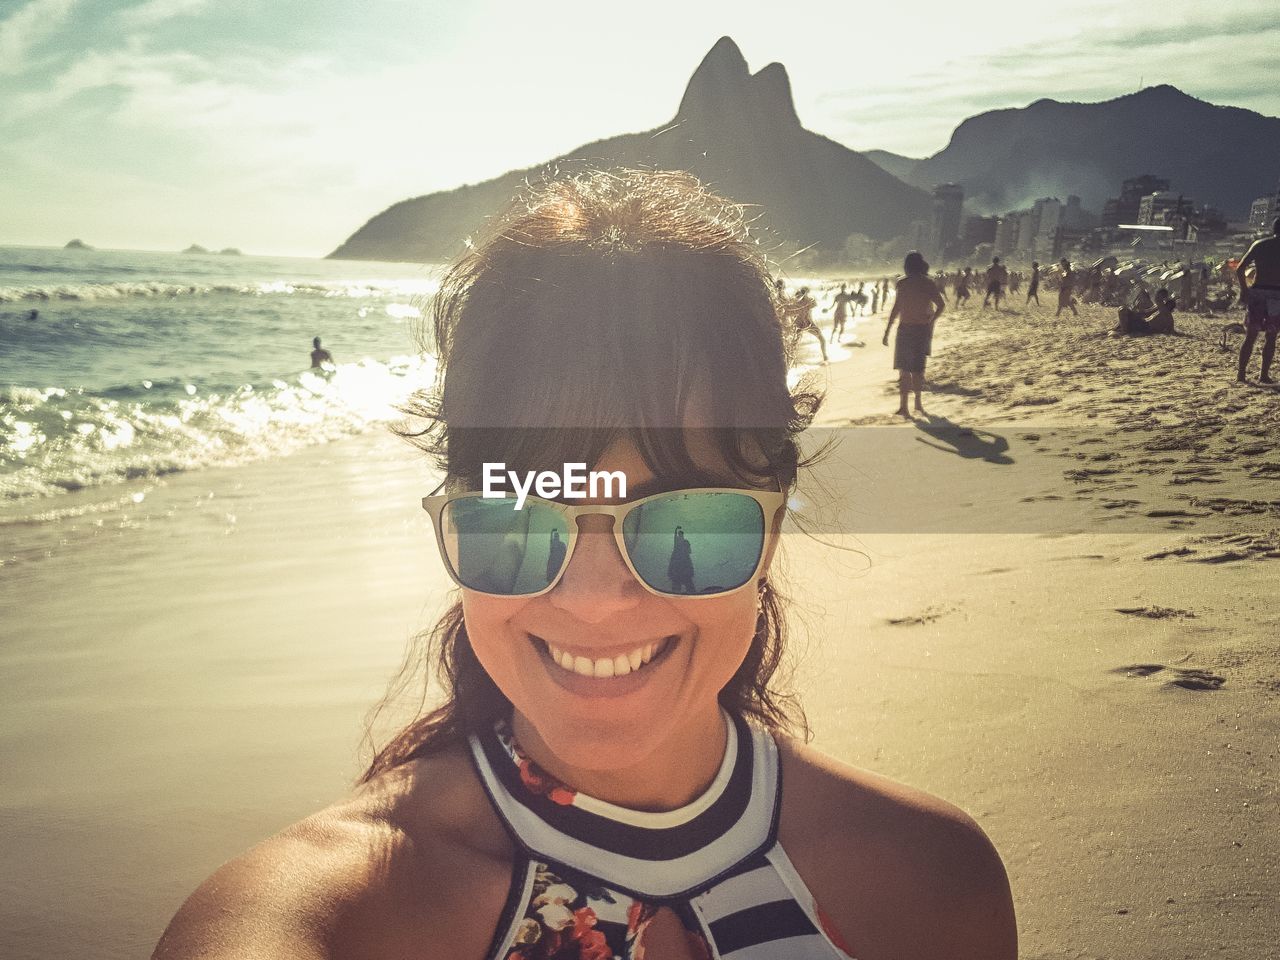 Portrait of woman smiling while wearing sunglasses at beach